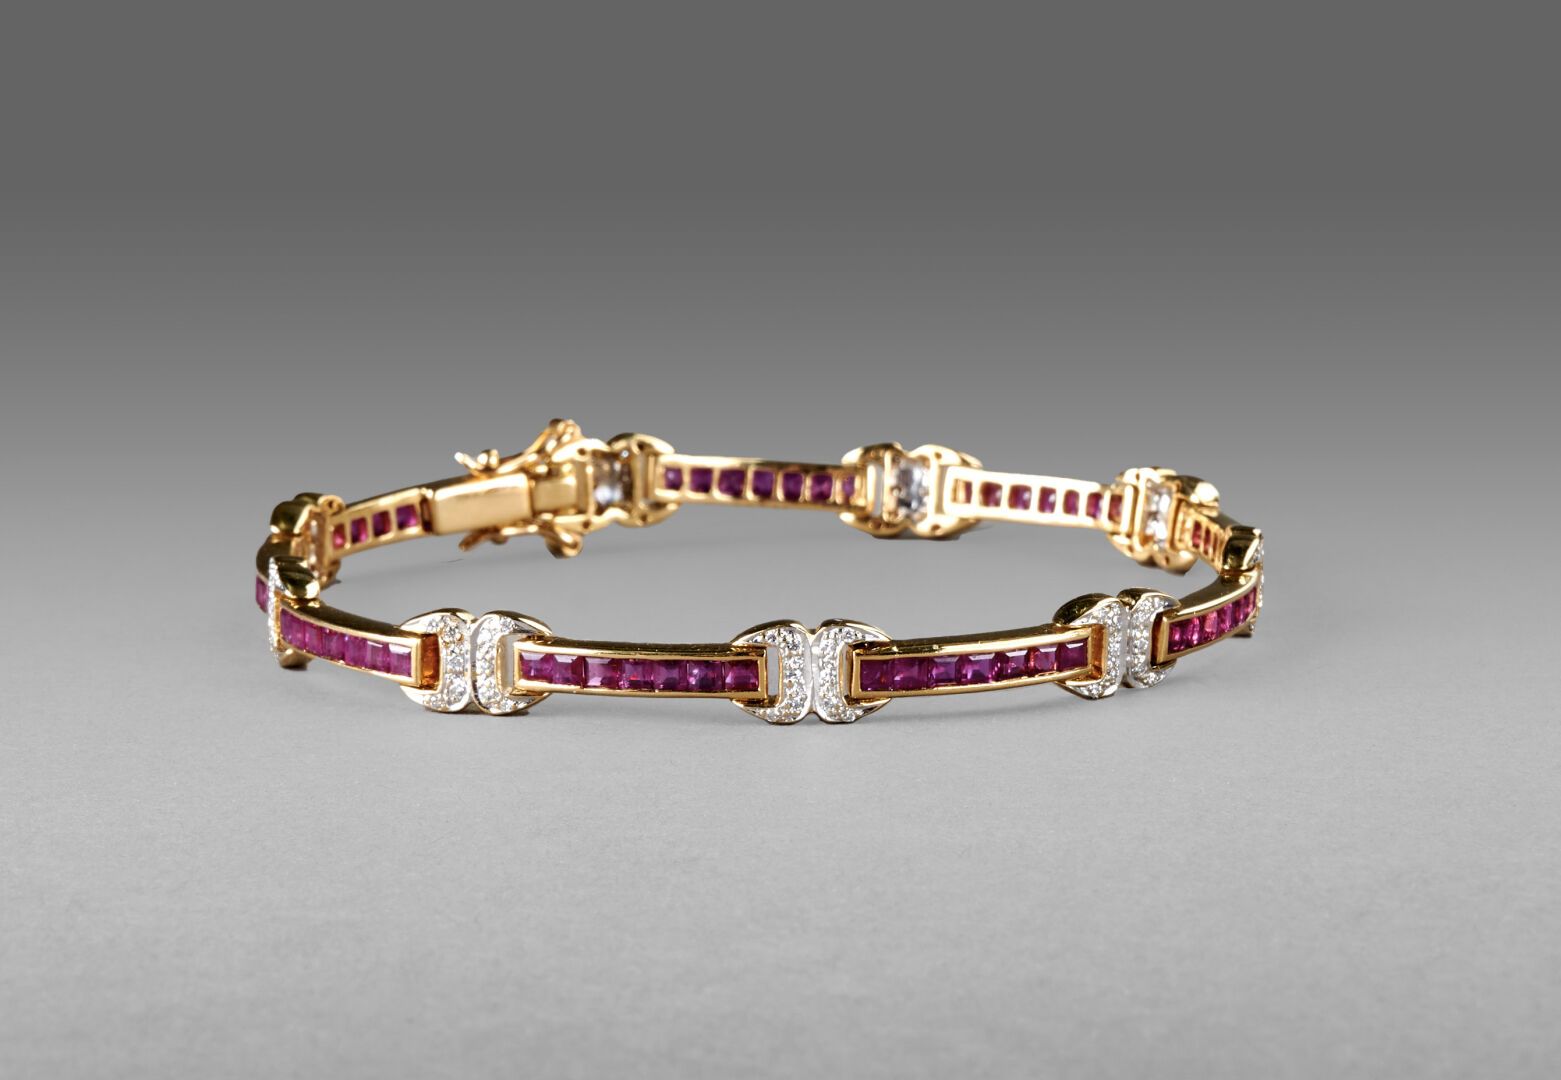 Null 18k yellow gold jewellery bracelet with linear links set with calibrated ru&hellip;